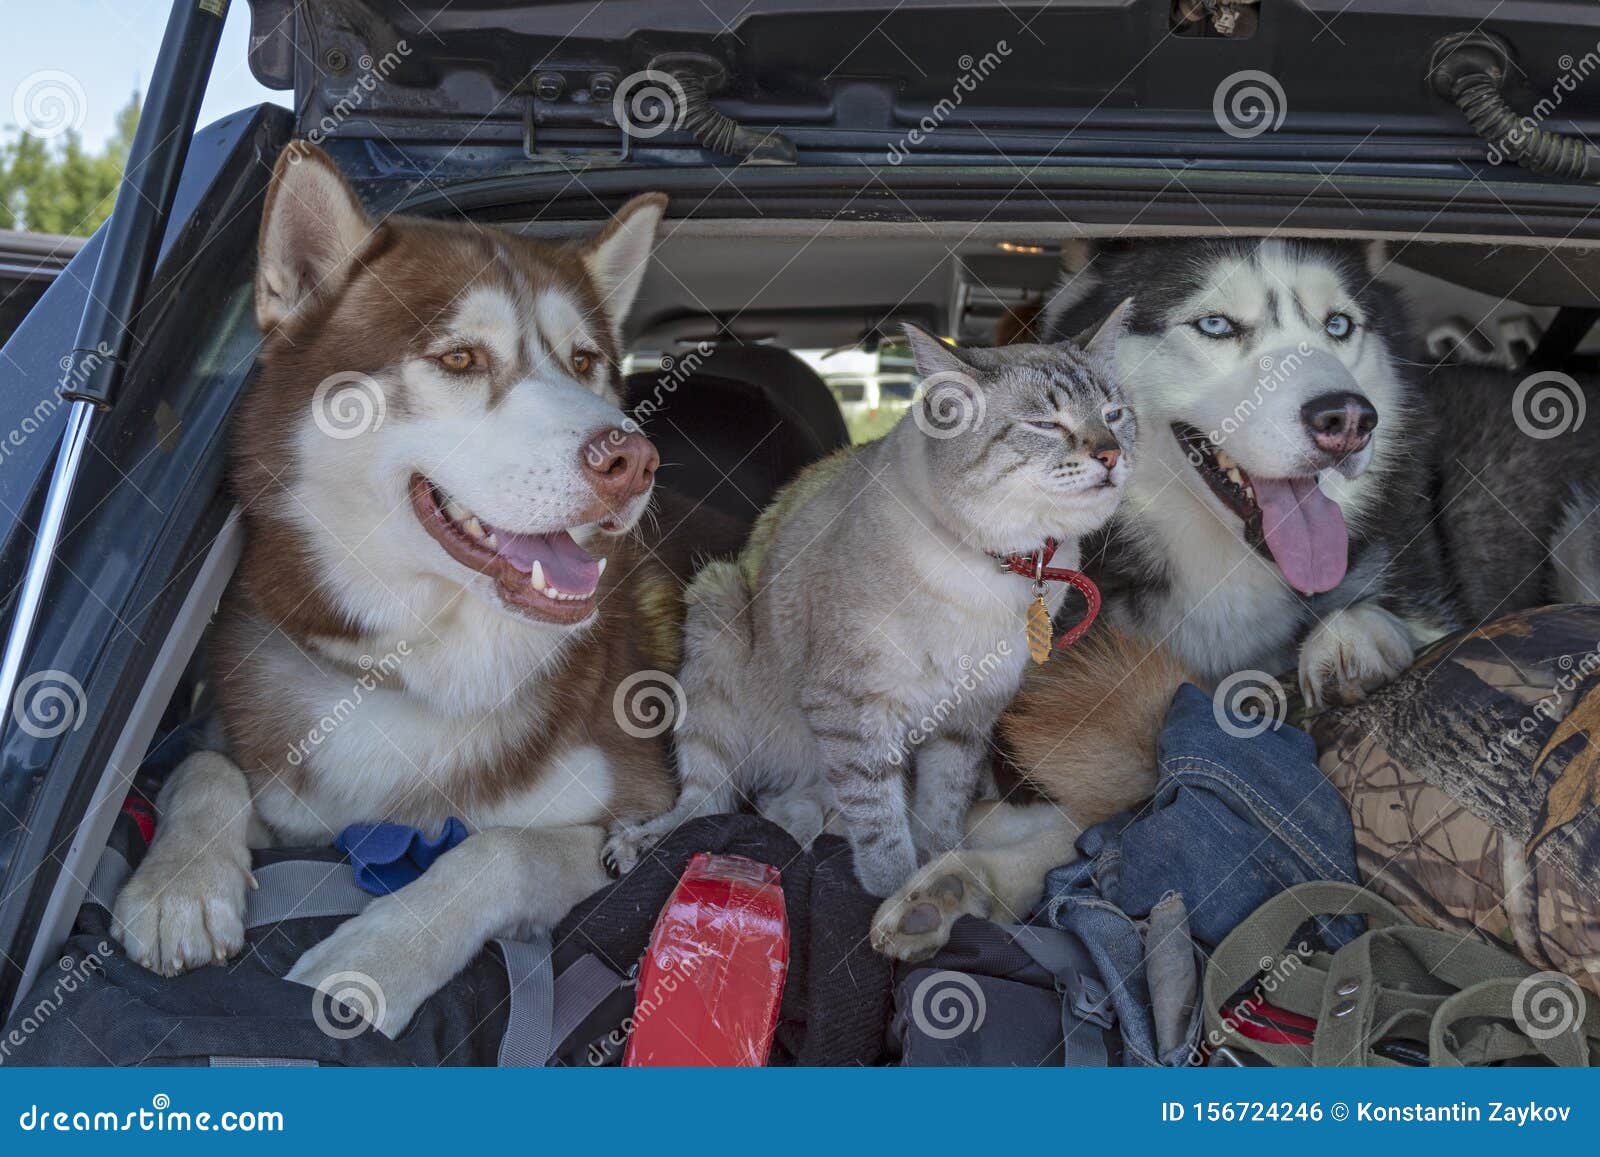 friendship cat and dog. two husky dogs and cat with blue eyes in the trunk car.